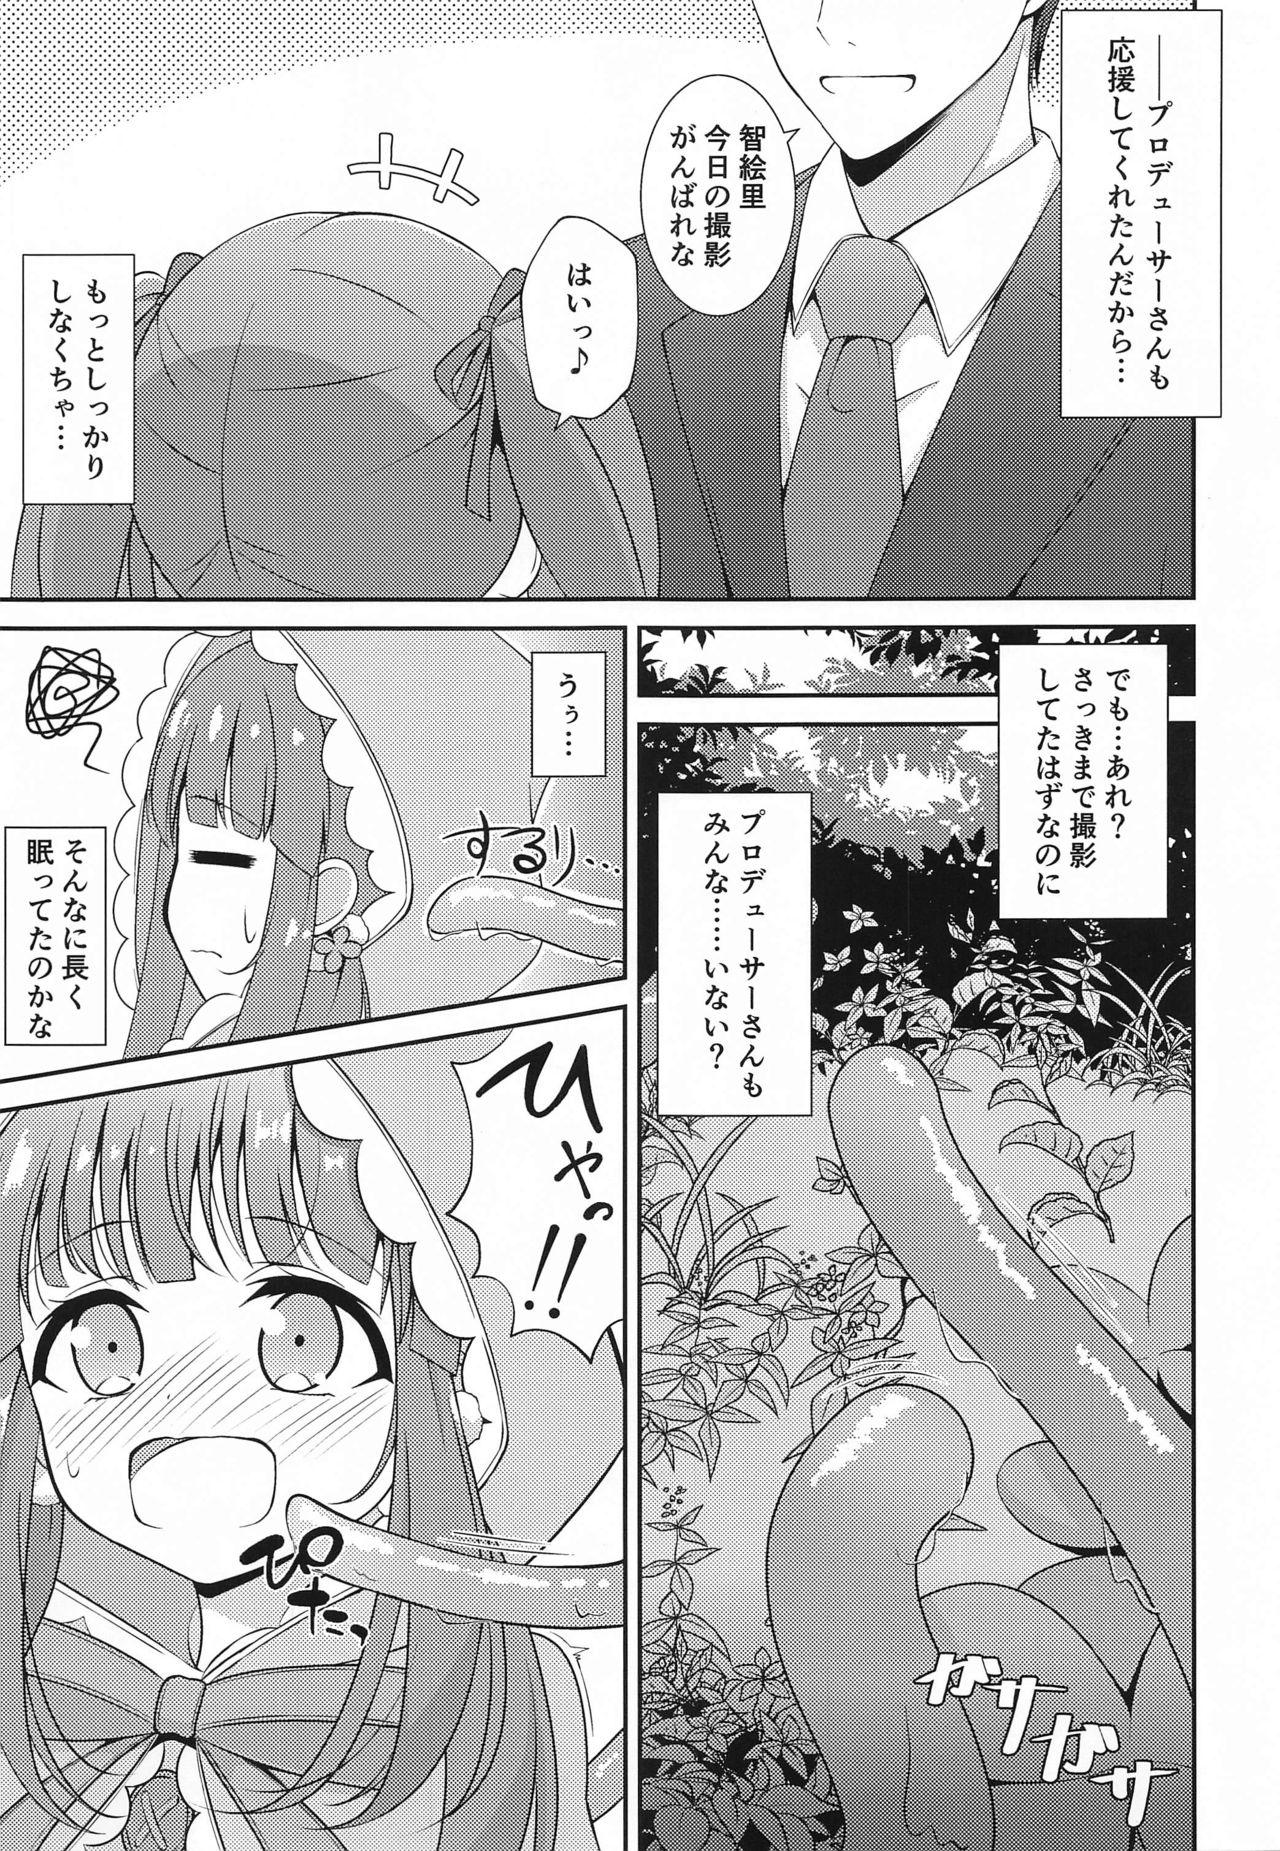 Hoe Chieri-chan Taihen desu!! - The idolmaster Students - Page 4